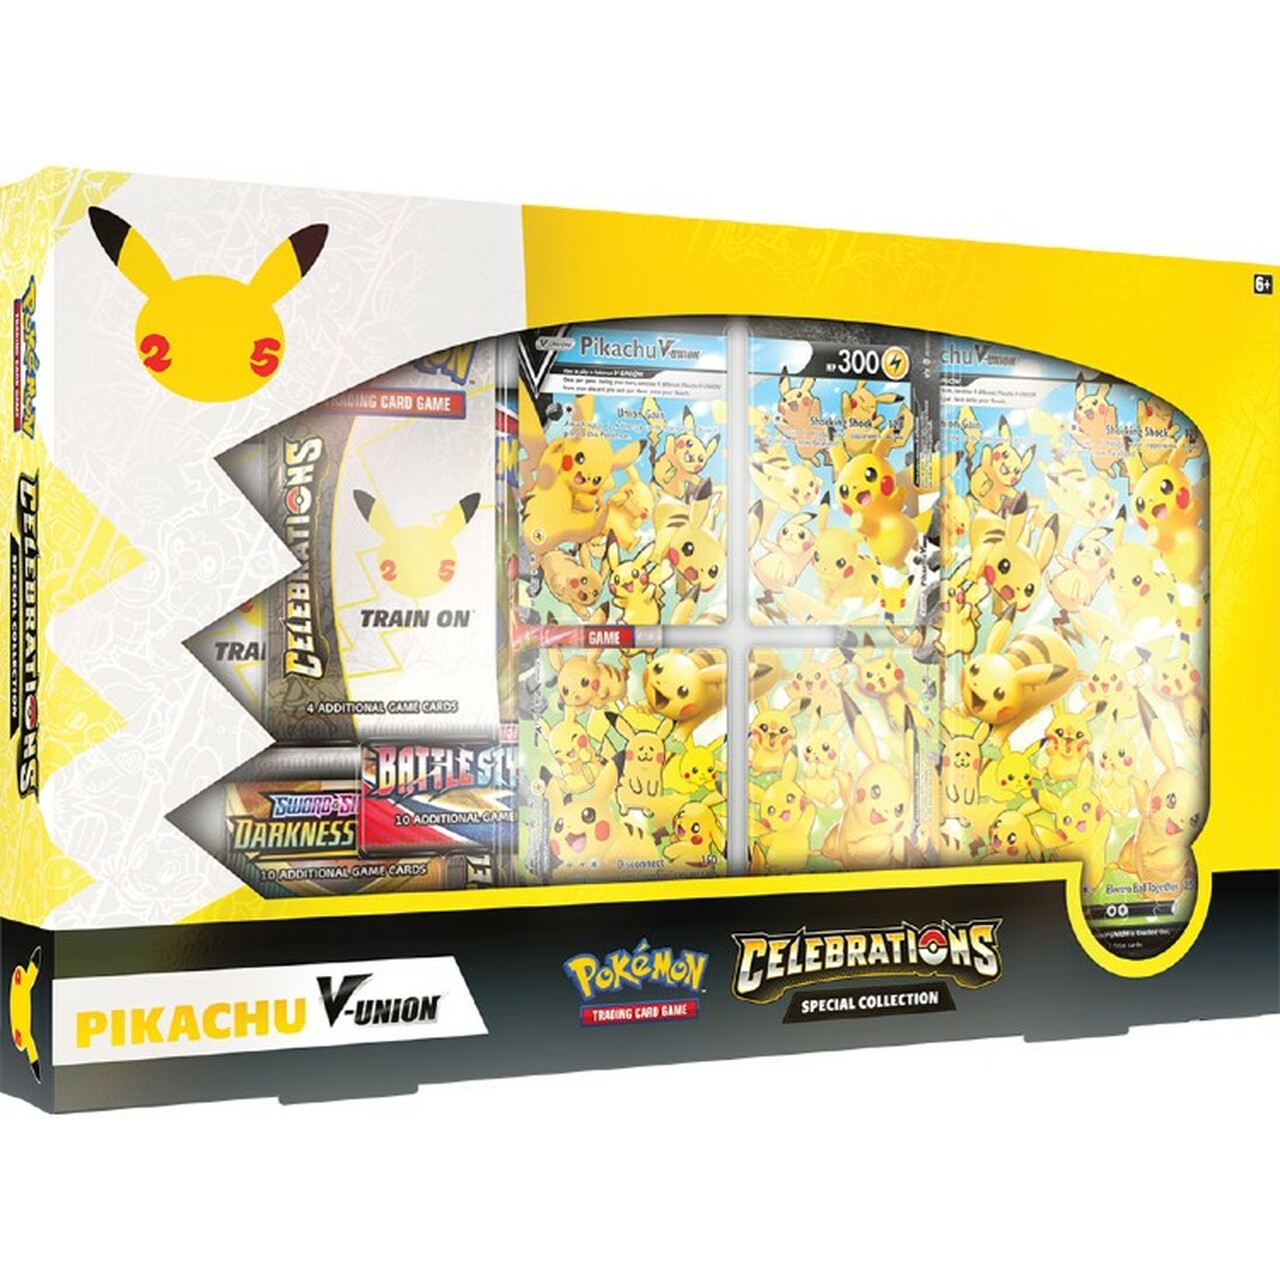 Pikachu V-union Celebrations Special collection | D20 Games